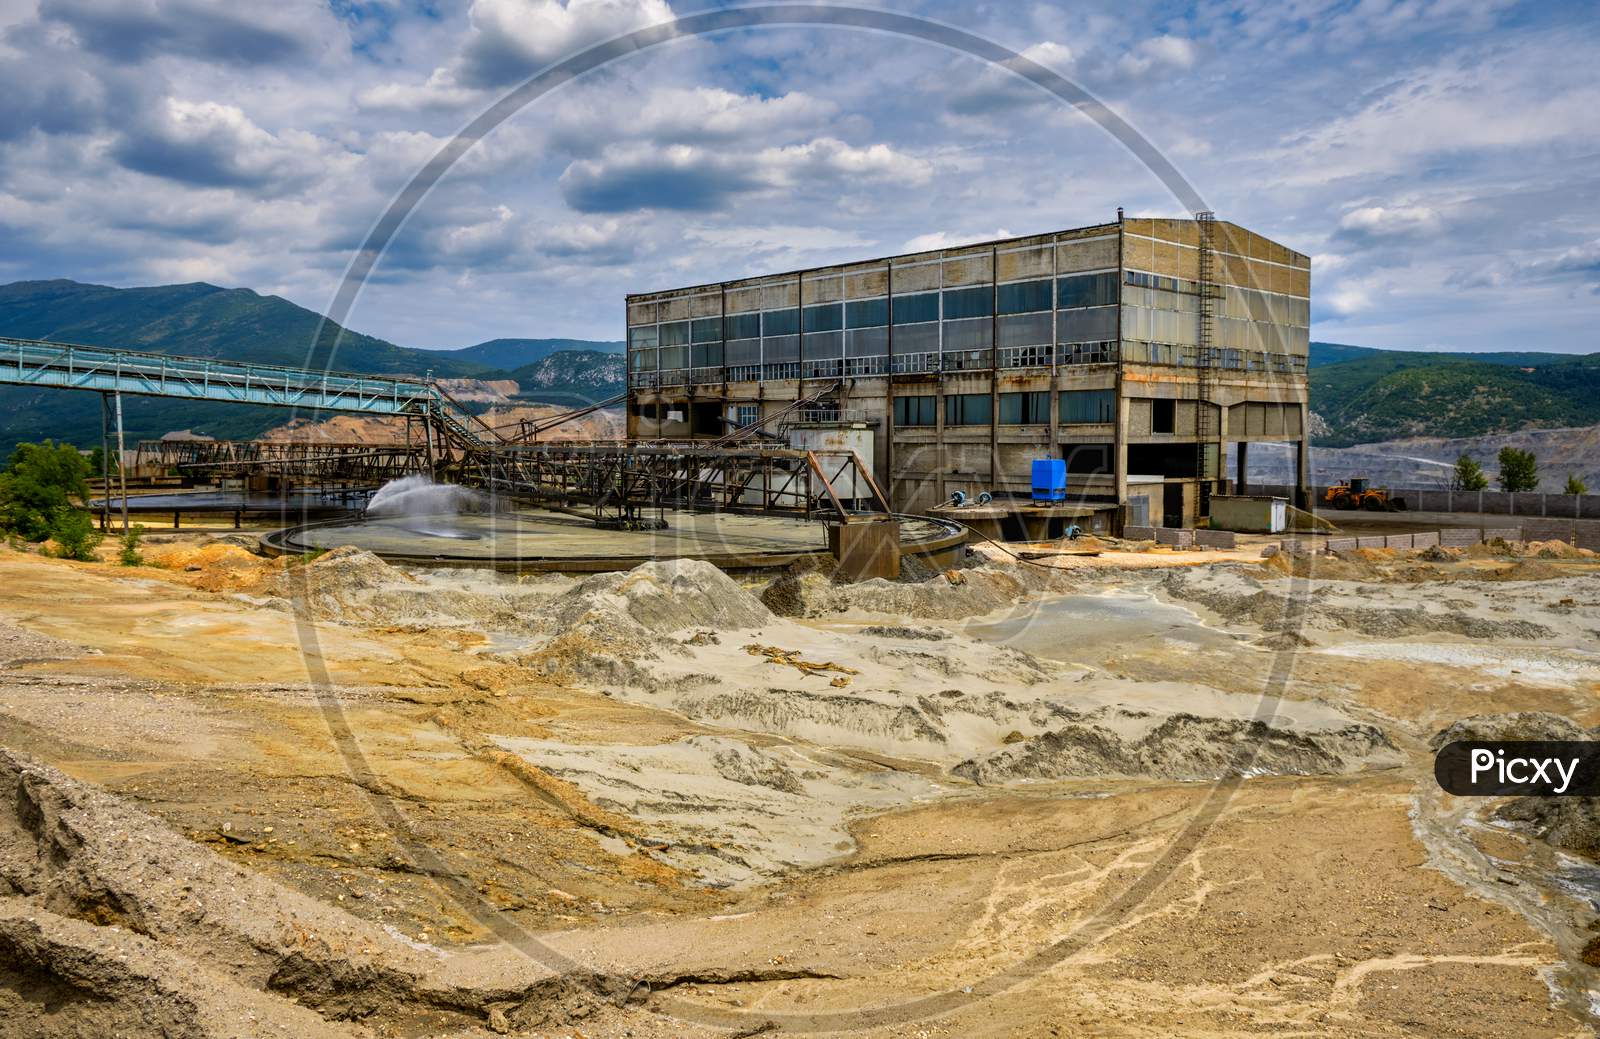 Old Industrial Flotation Building In Copper Mine In Bor, Serbia, Owned By Chinese Mining Company Zijin Mining Group